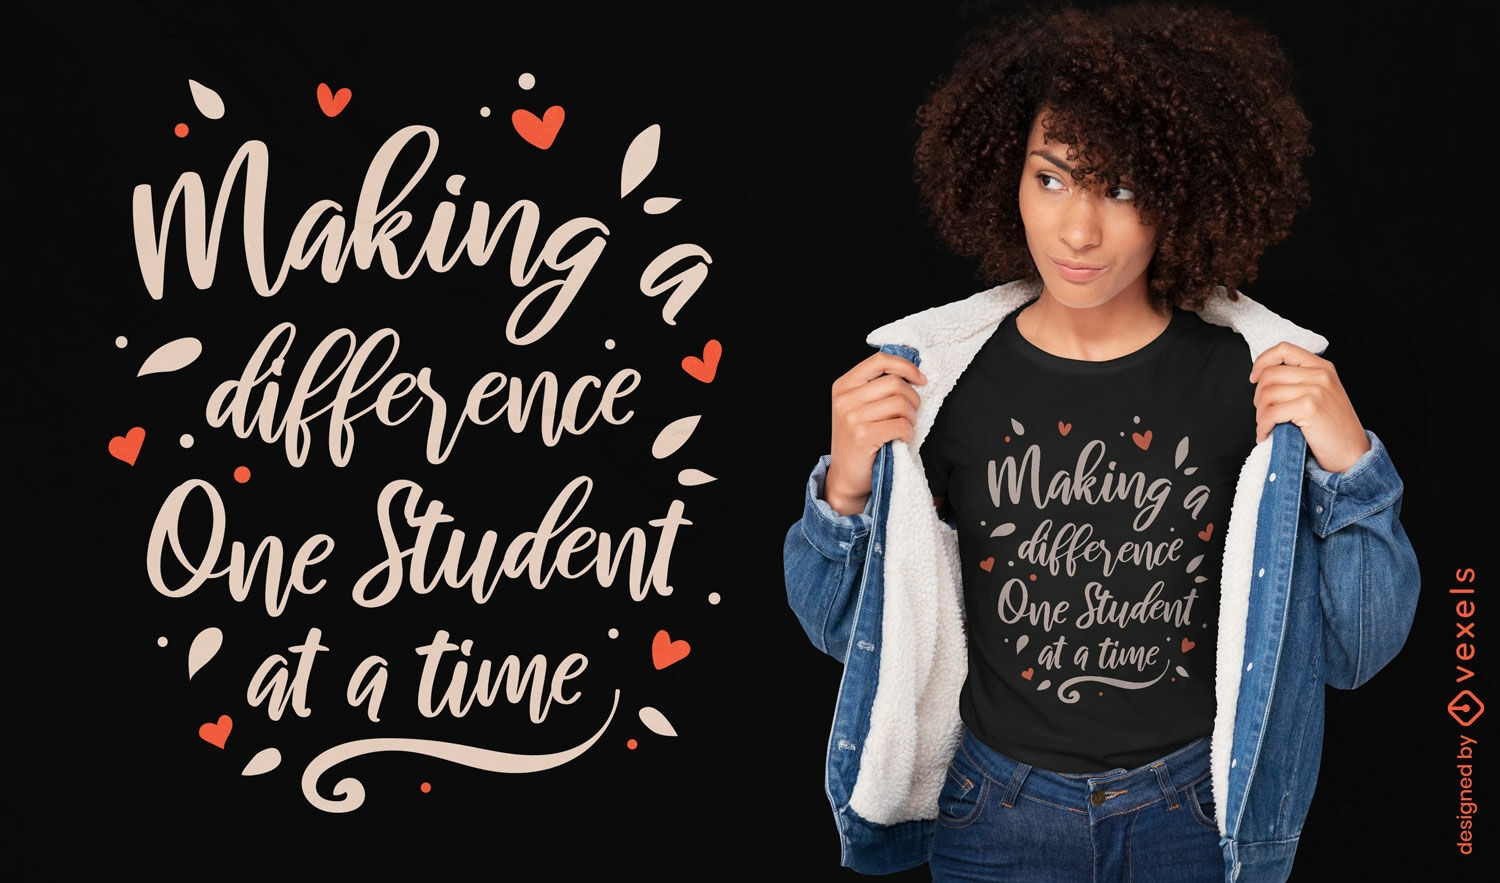 Making a difference one student at a time t-shirt